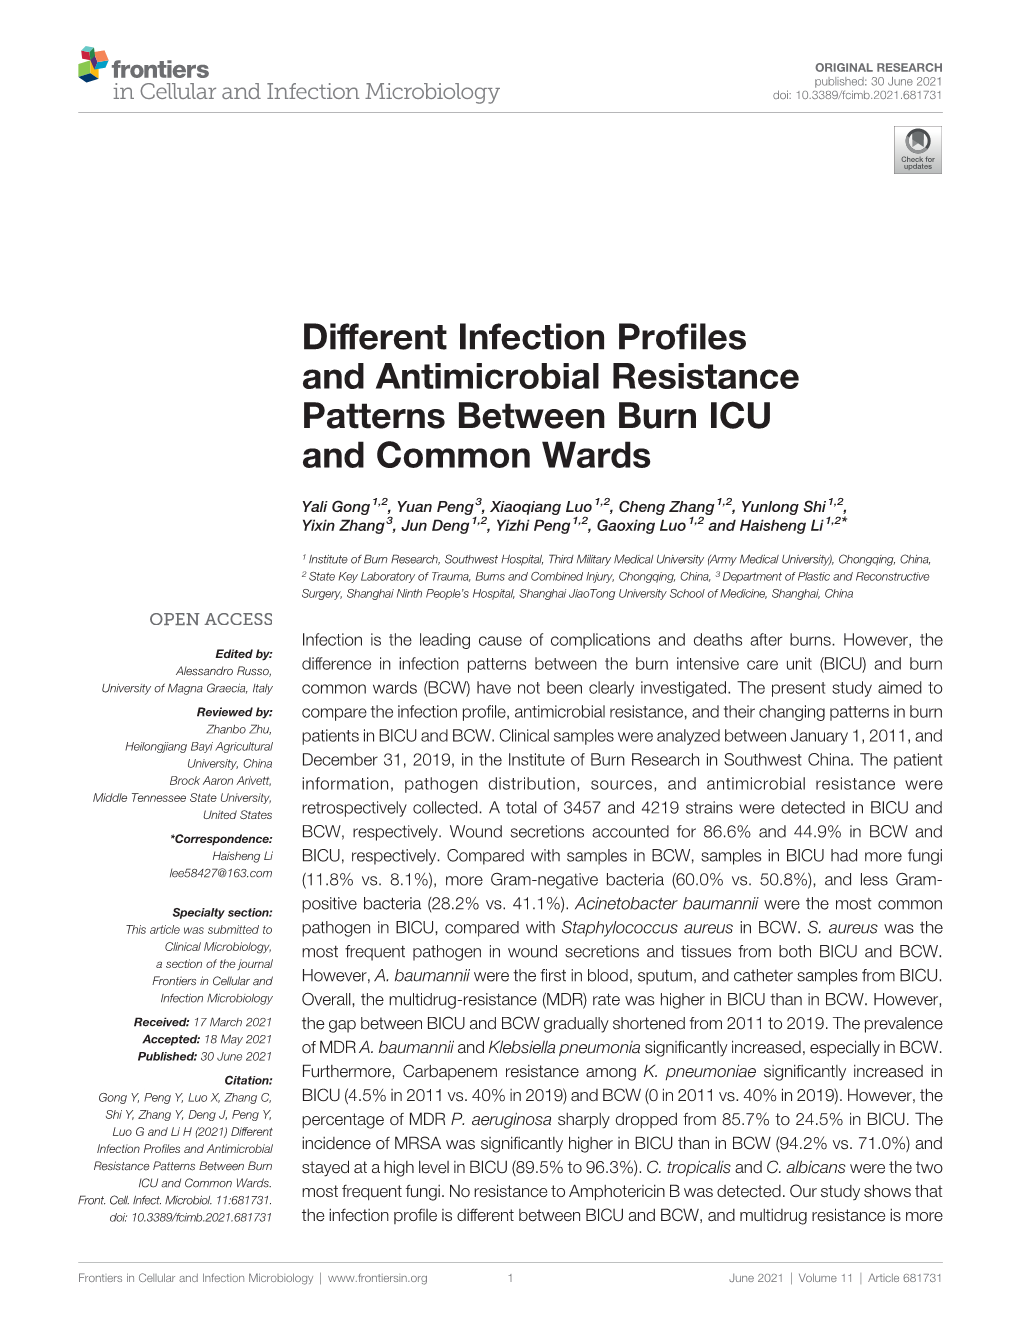 Different Infection Profiles and Antimicrobial Resistance Patterns